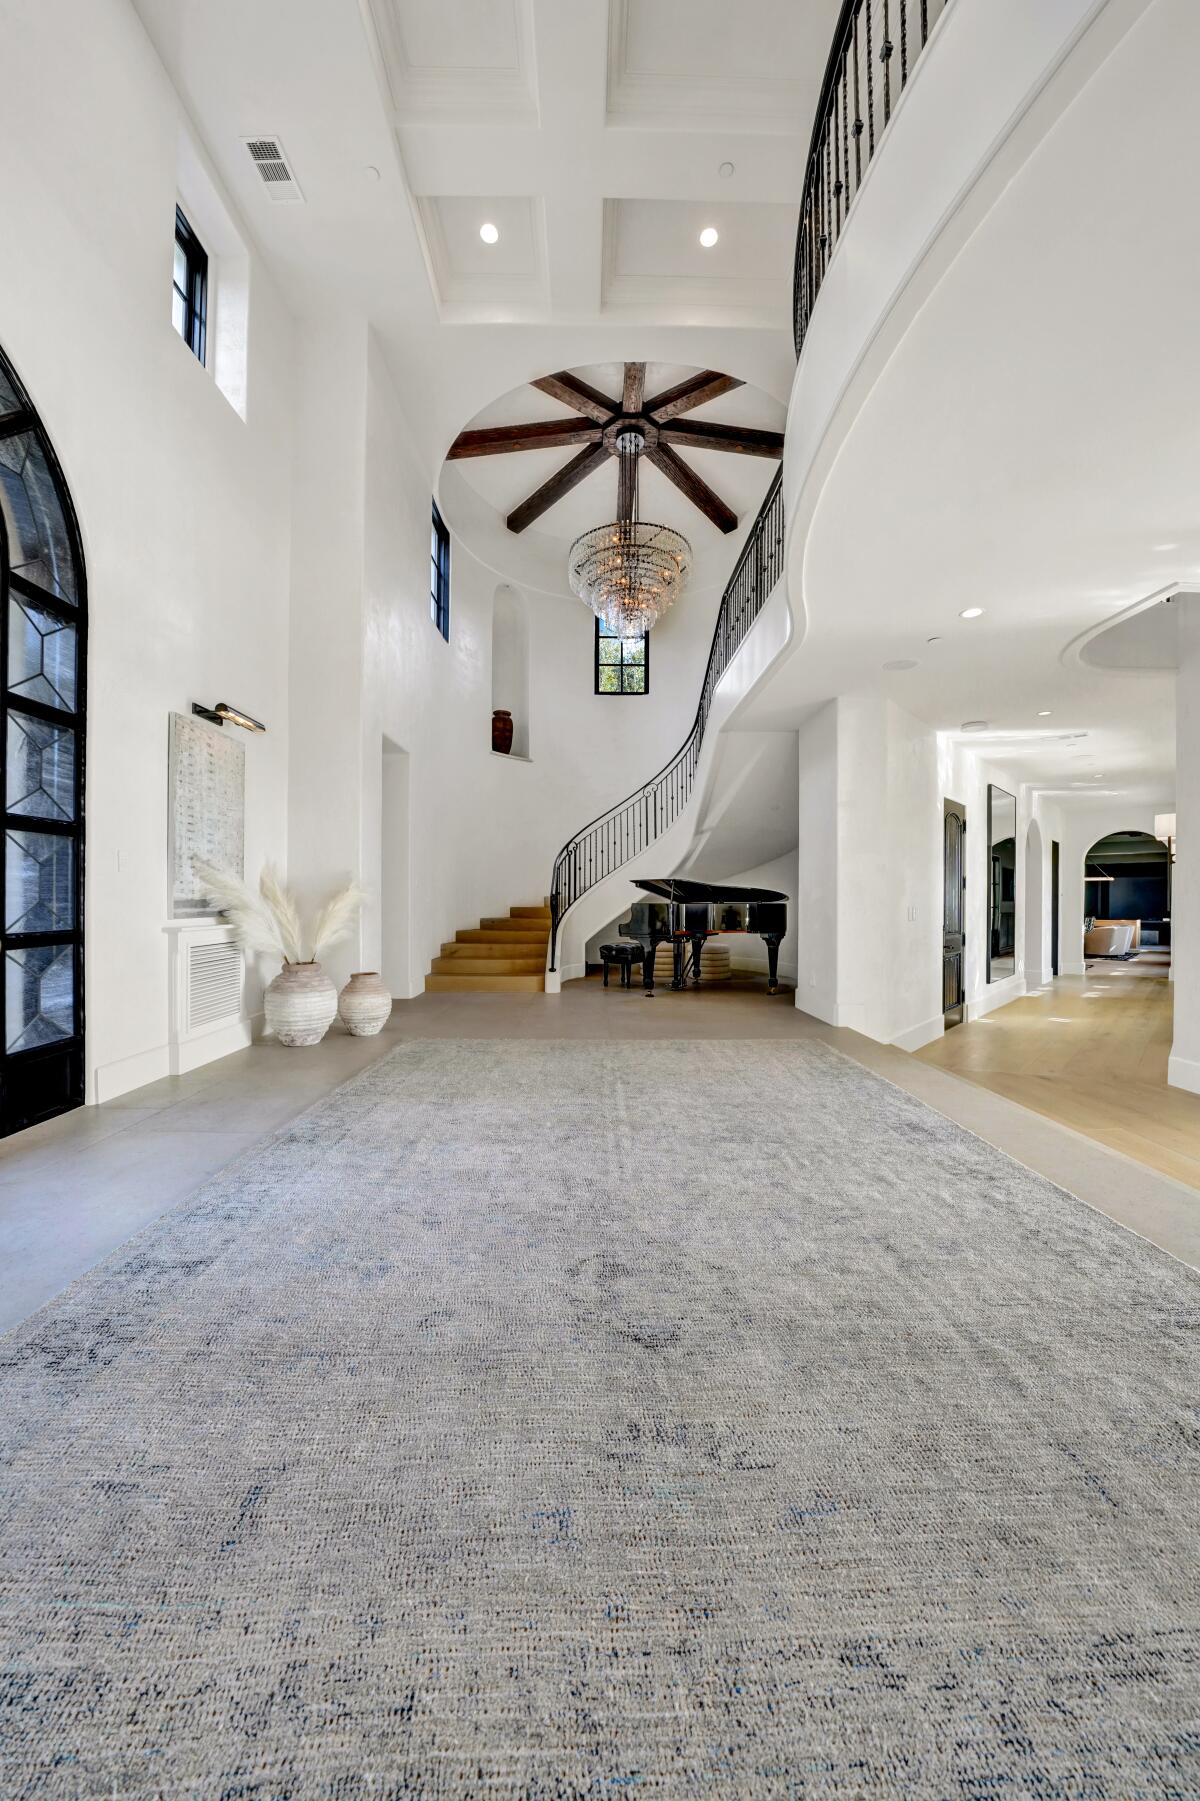 Pictured is the entryway for 1 Shoreridge, which is currently being listed at almost $40 million.